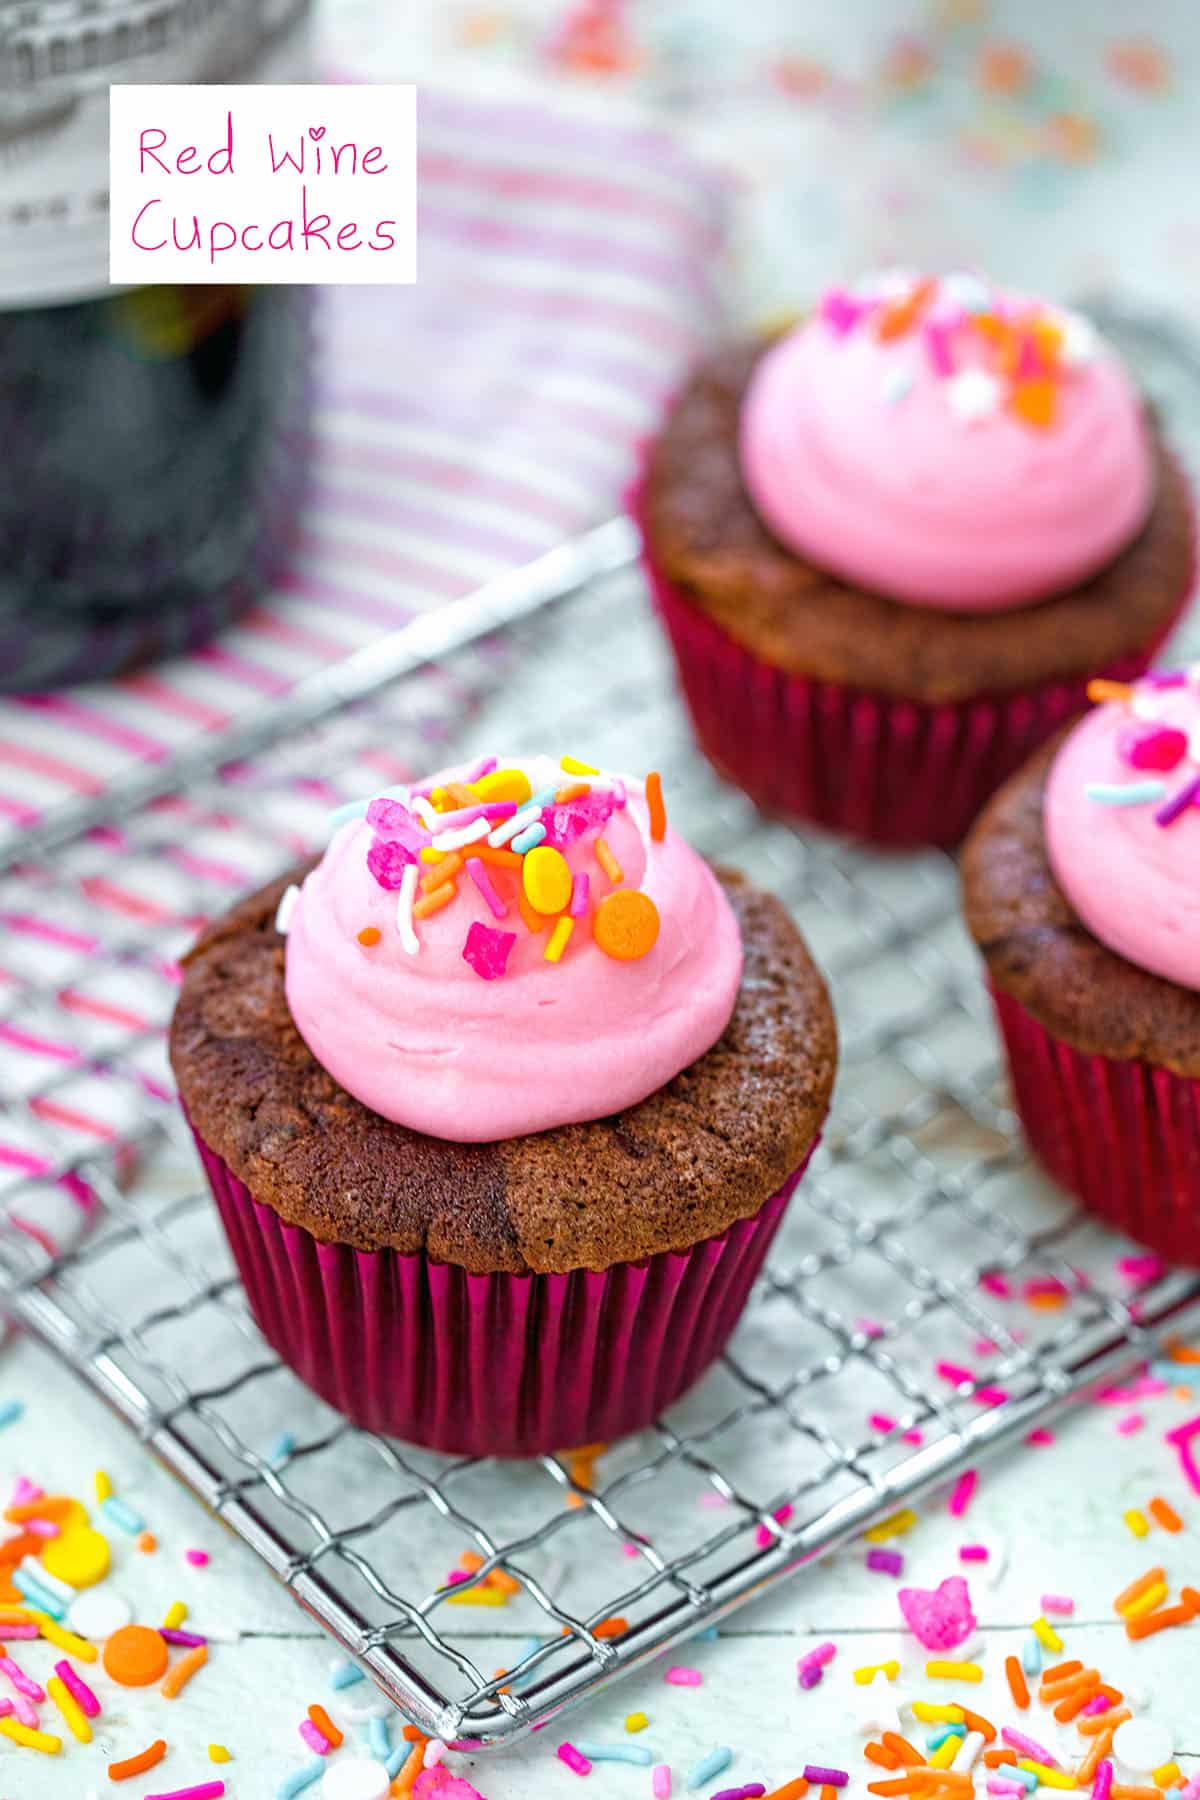 Head-on view of a red wine cupcake with pink frosting and sprinkles on a baking rack with more cupcakes and sprinkles in the background with recipe title at top.